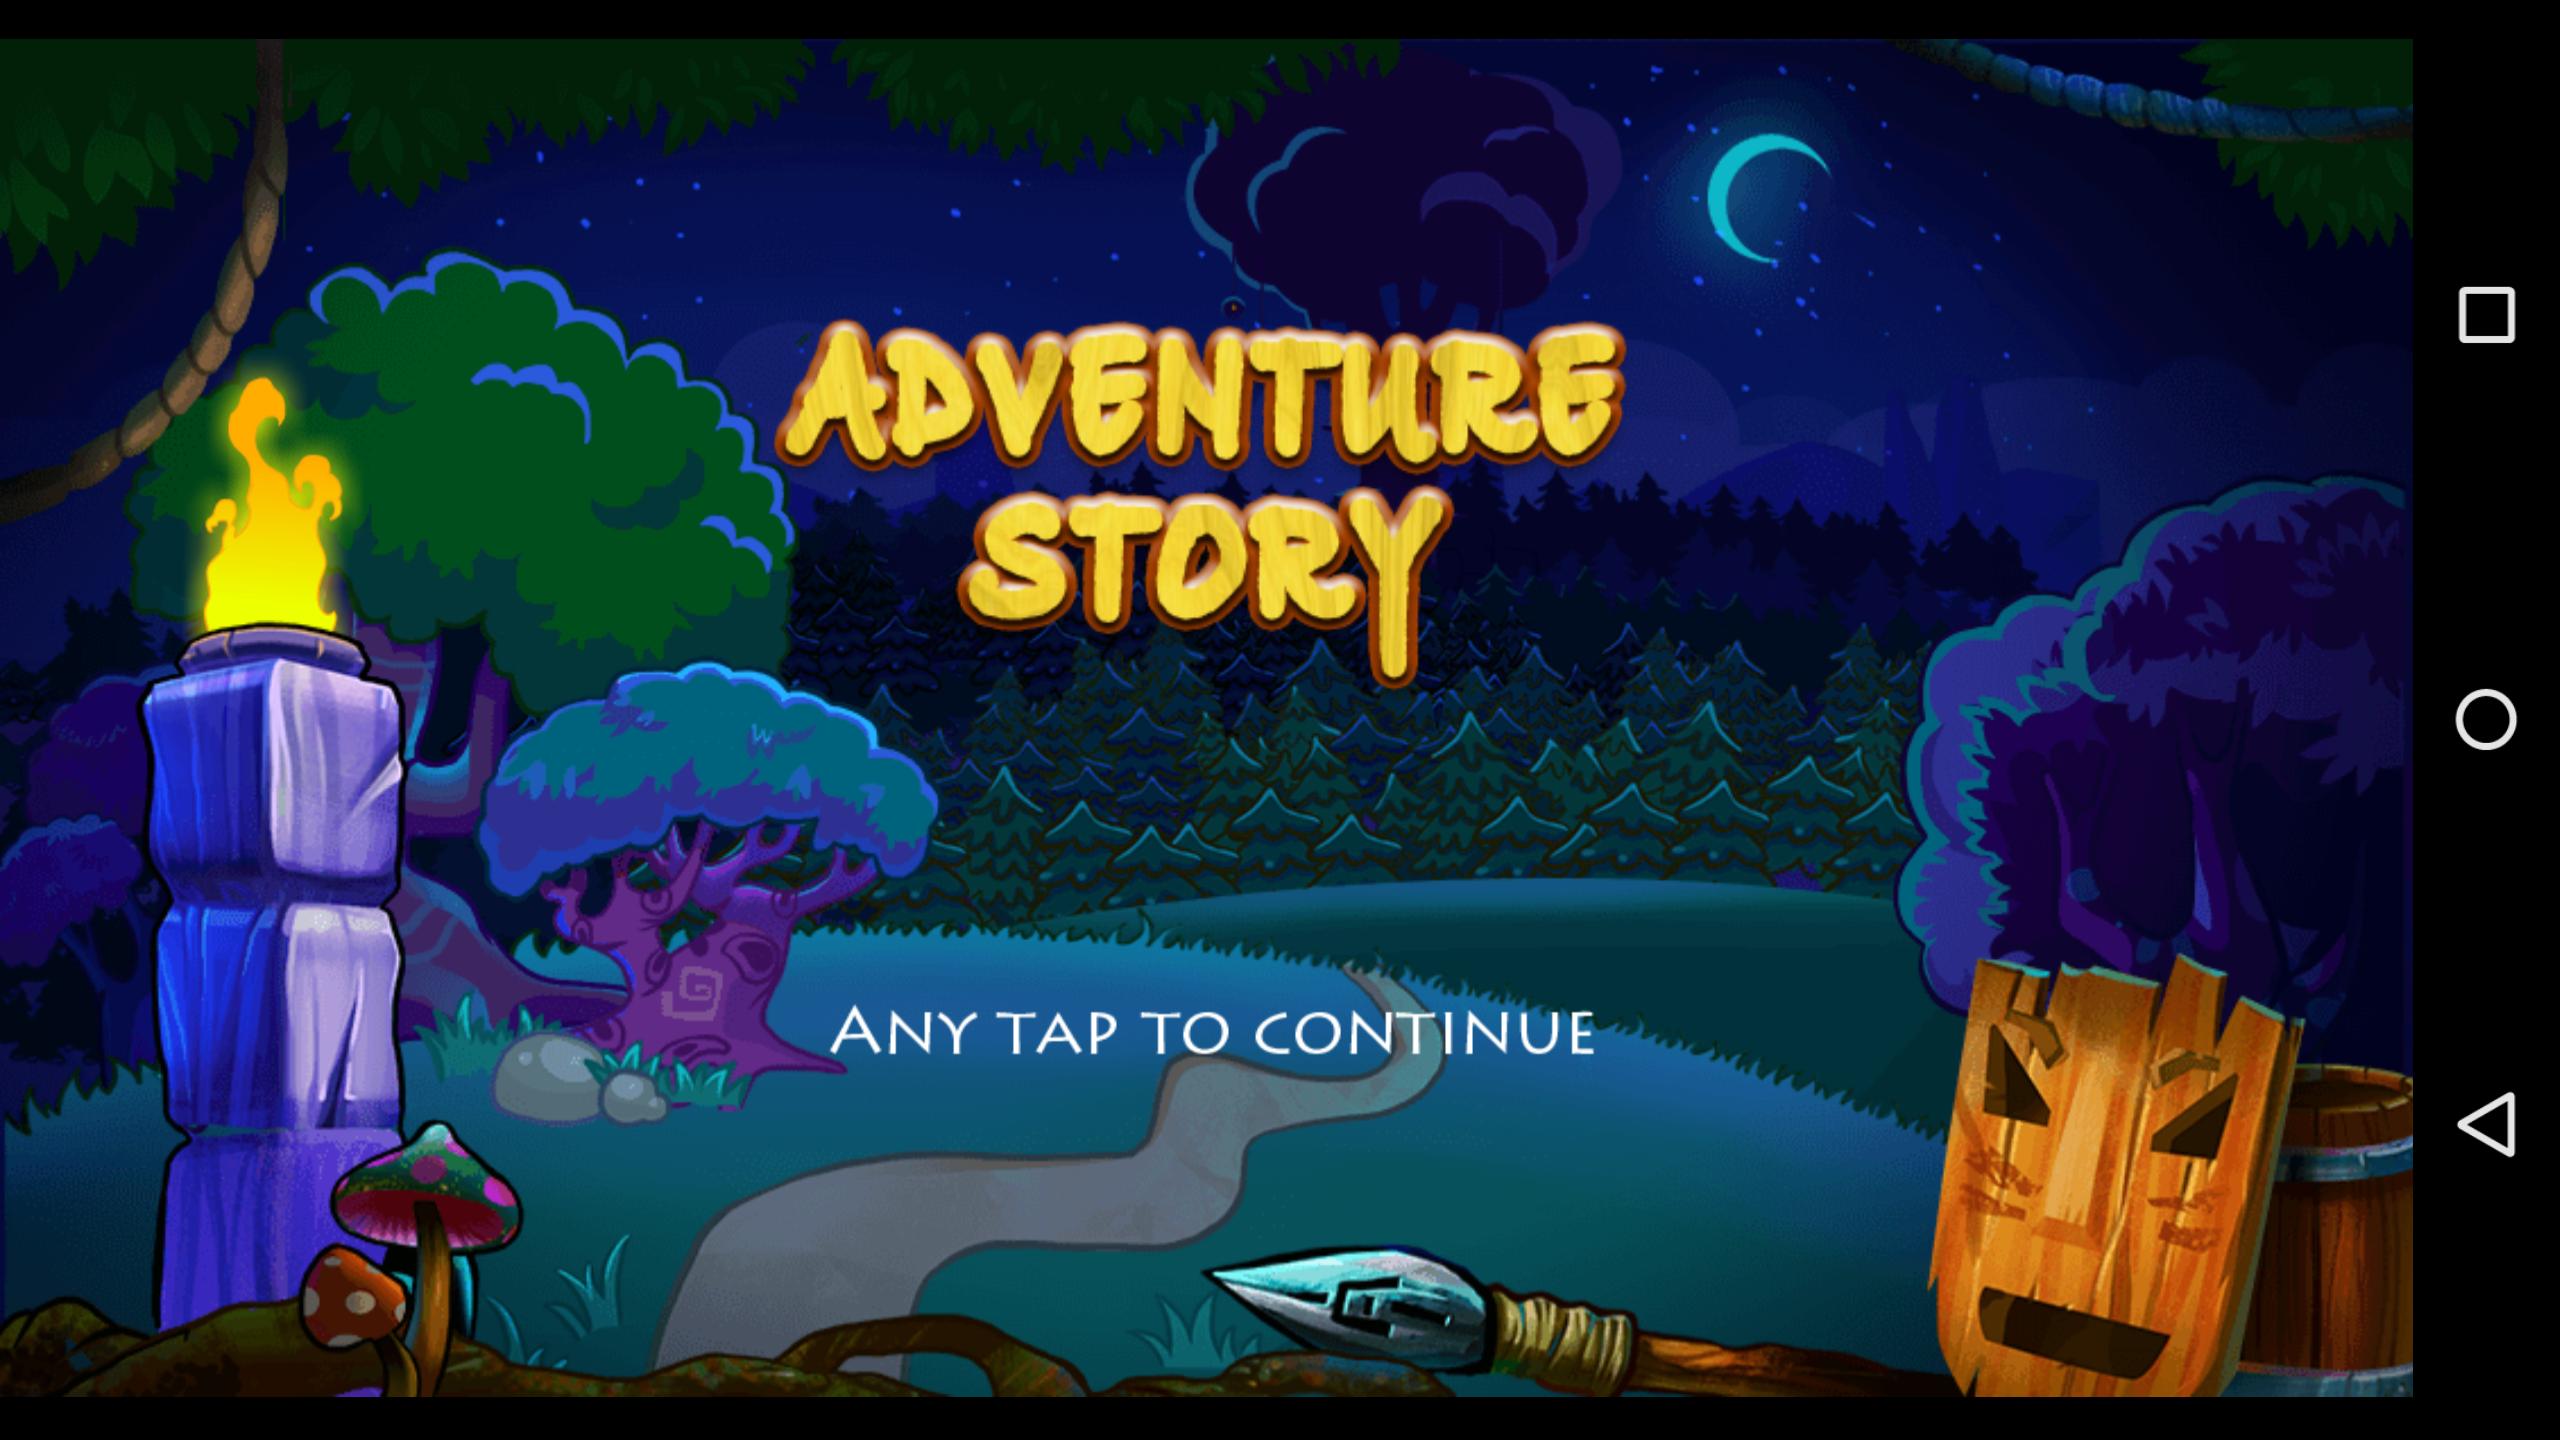 Adventure story writing. Adventure story игра. Adventure story 1. EBF Adventure story. Adventure story for Kids.